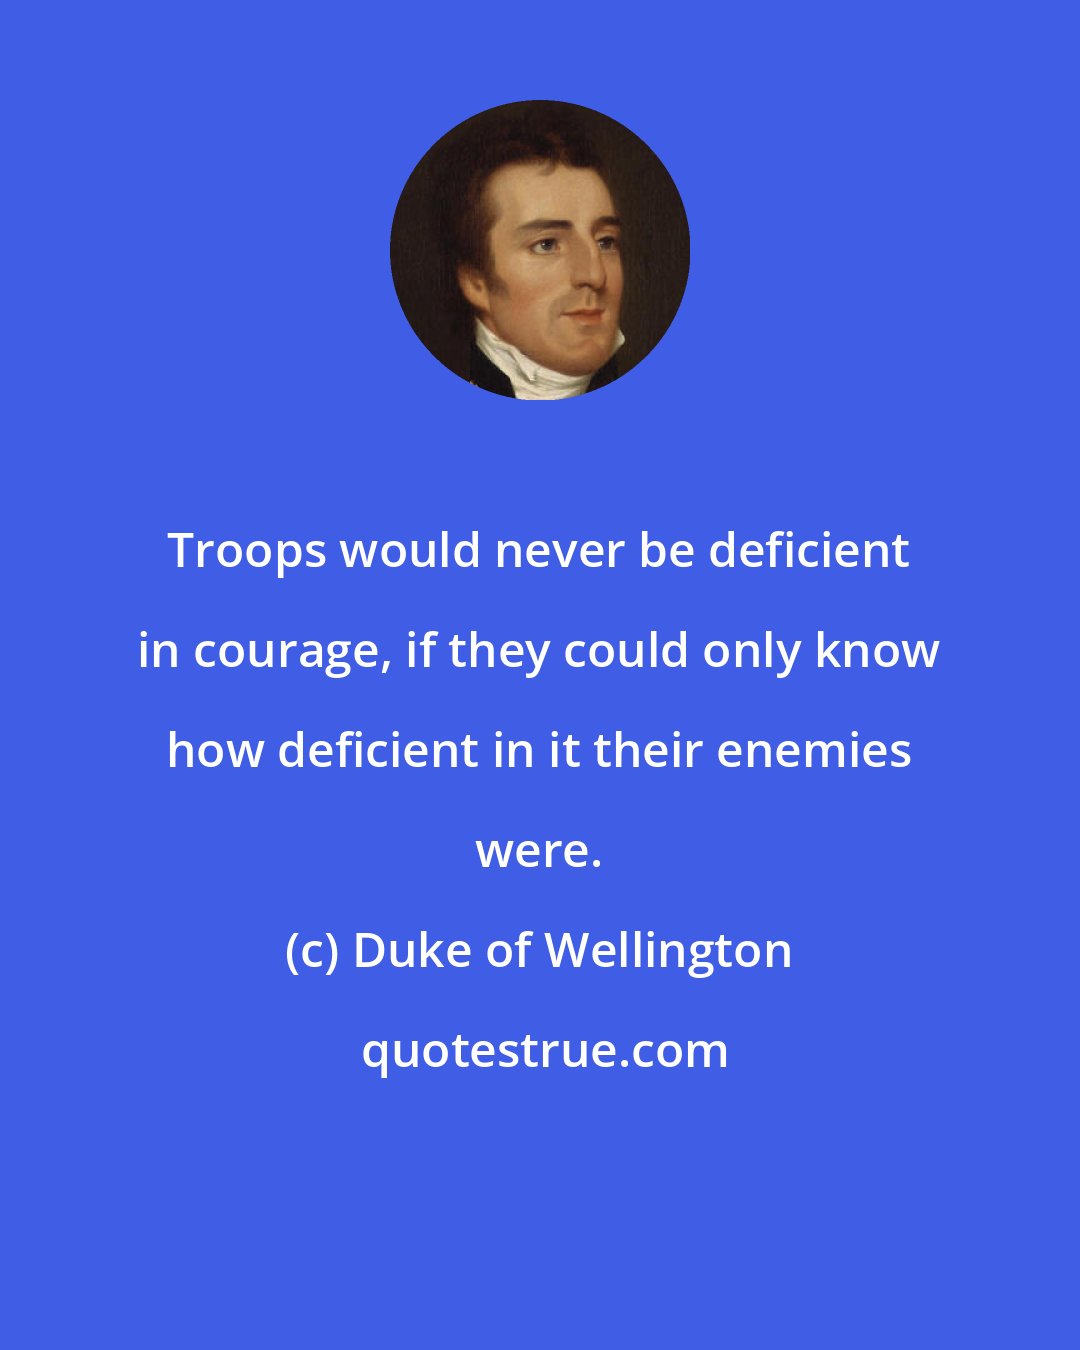 Duke of Wellington: Troops would never be deficient in courage, if they could only know how deficient in it their enemies were.